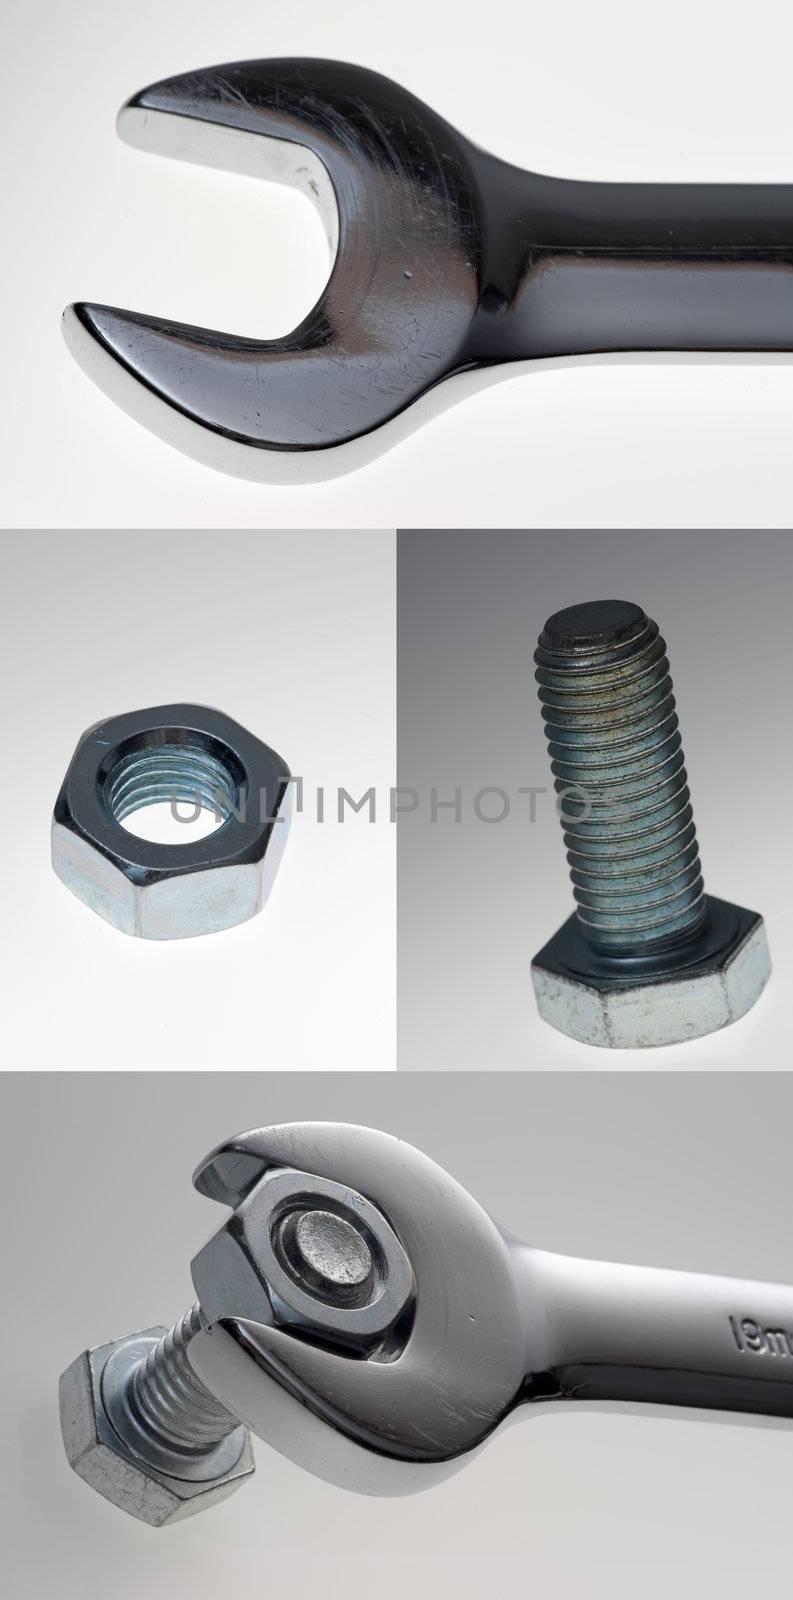 Assortment of extreme closeups of a wrench, nut and bolt